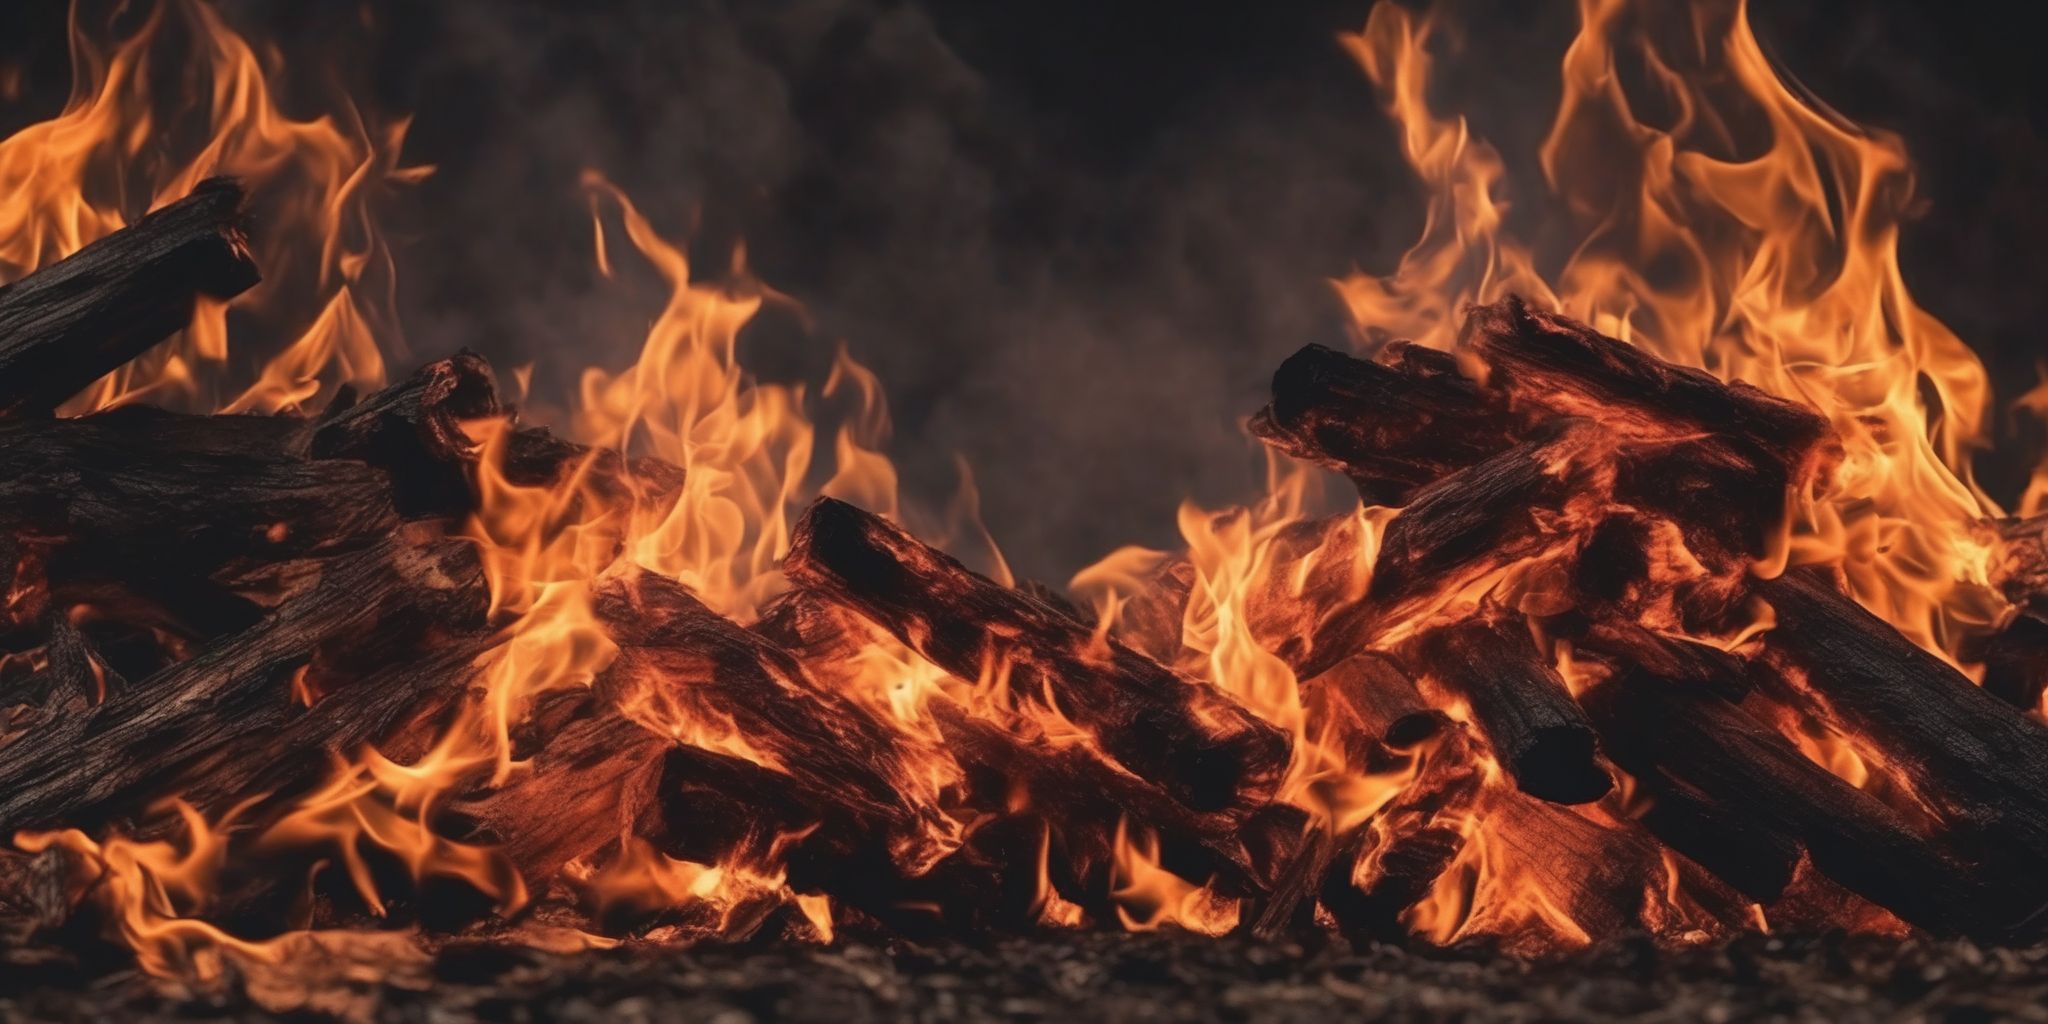 Fire  in realistic, photographic style